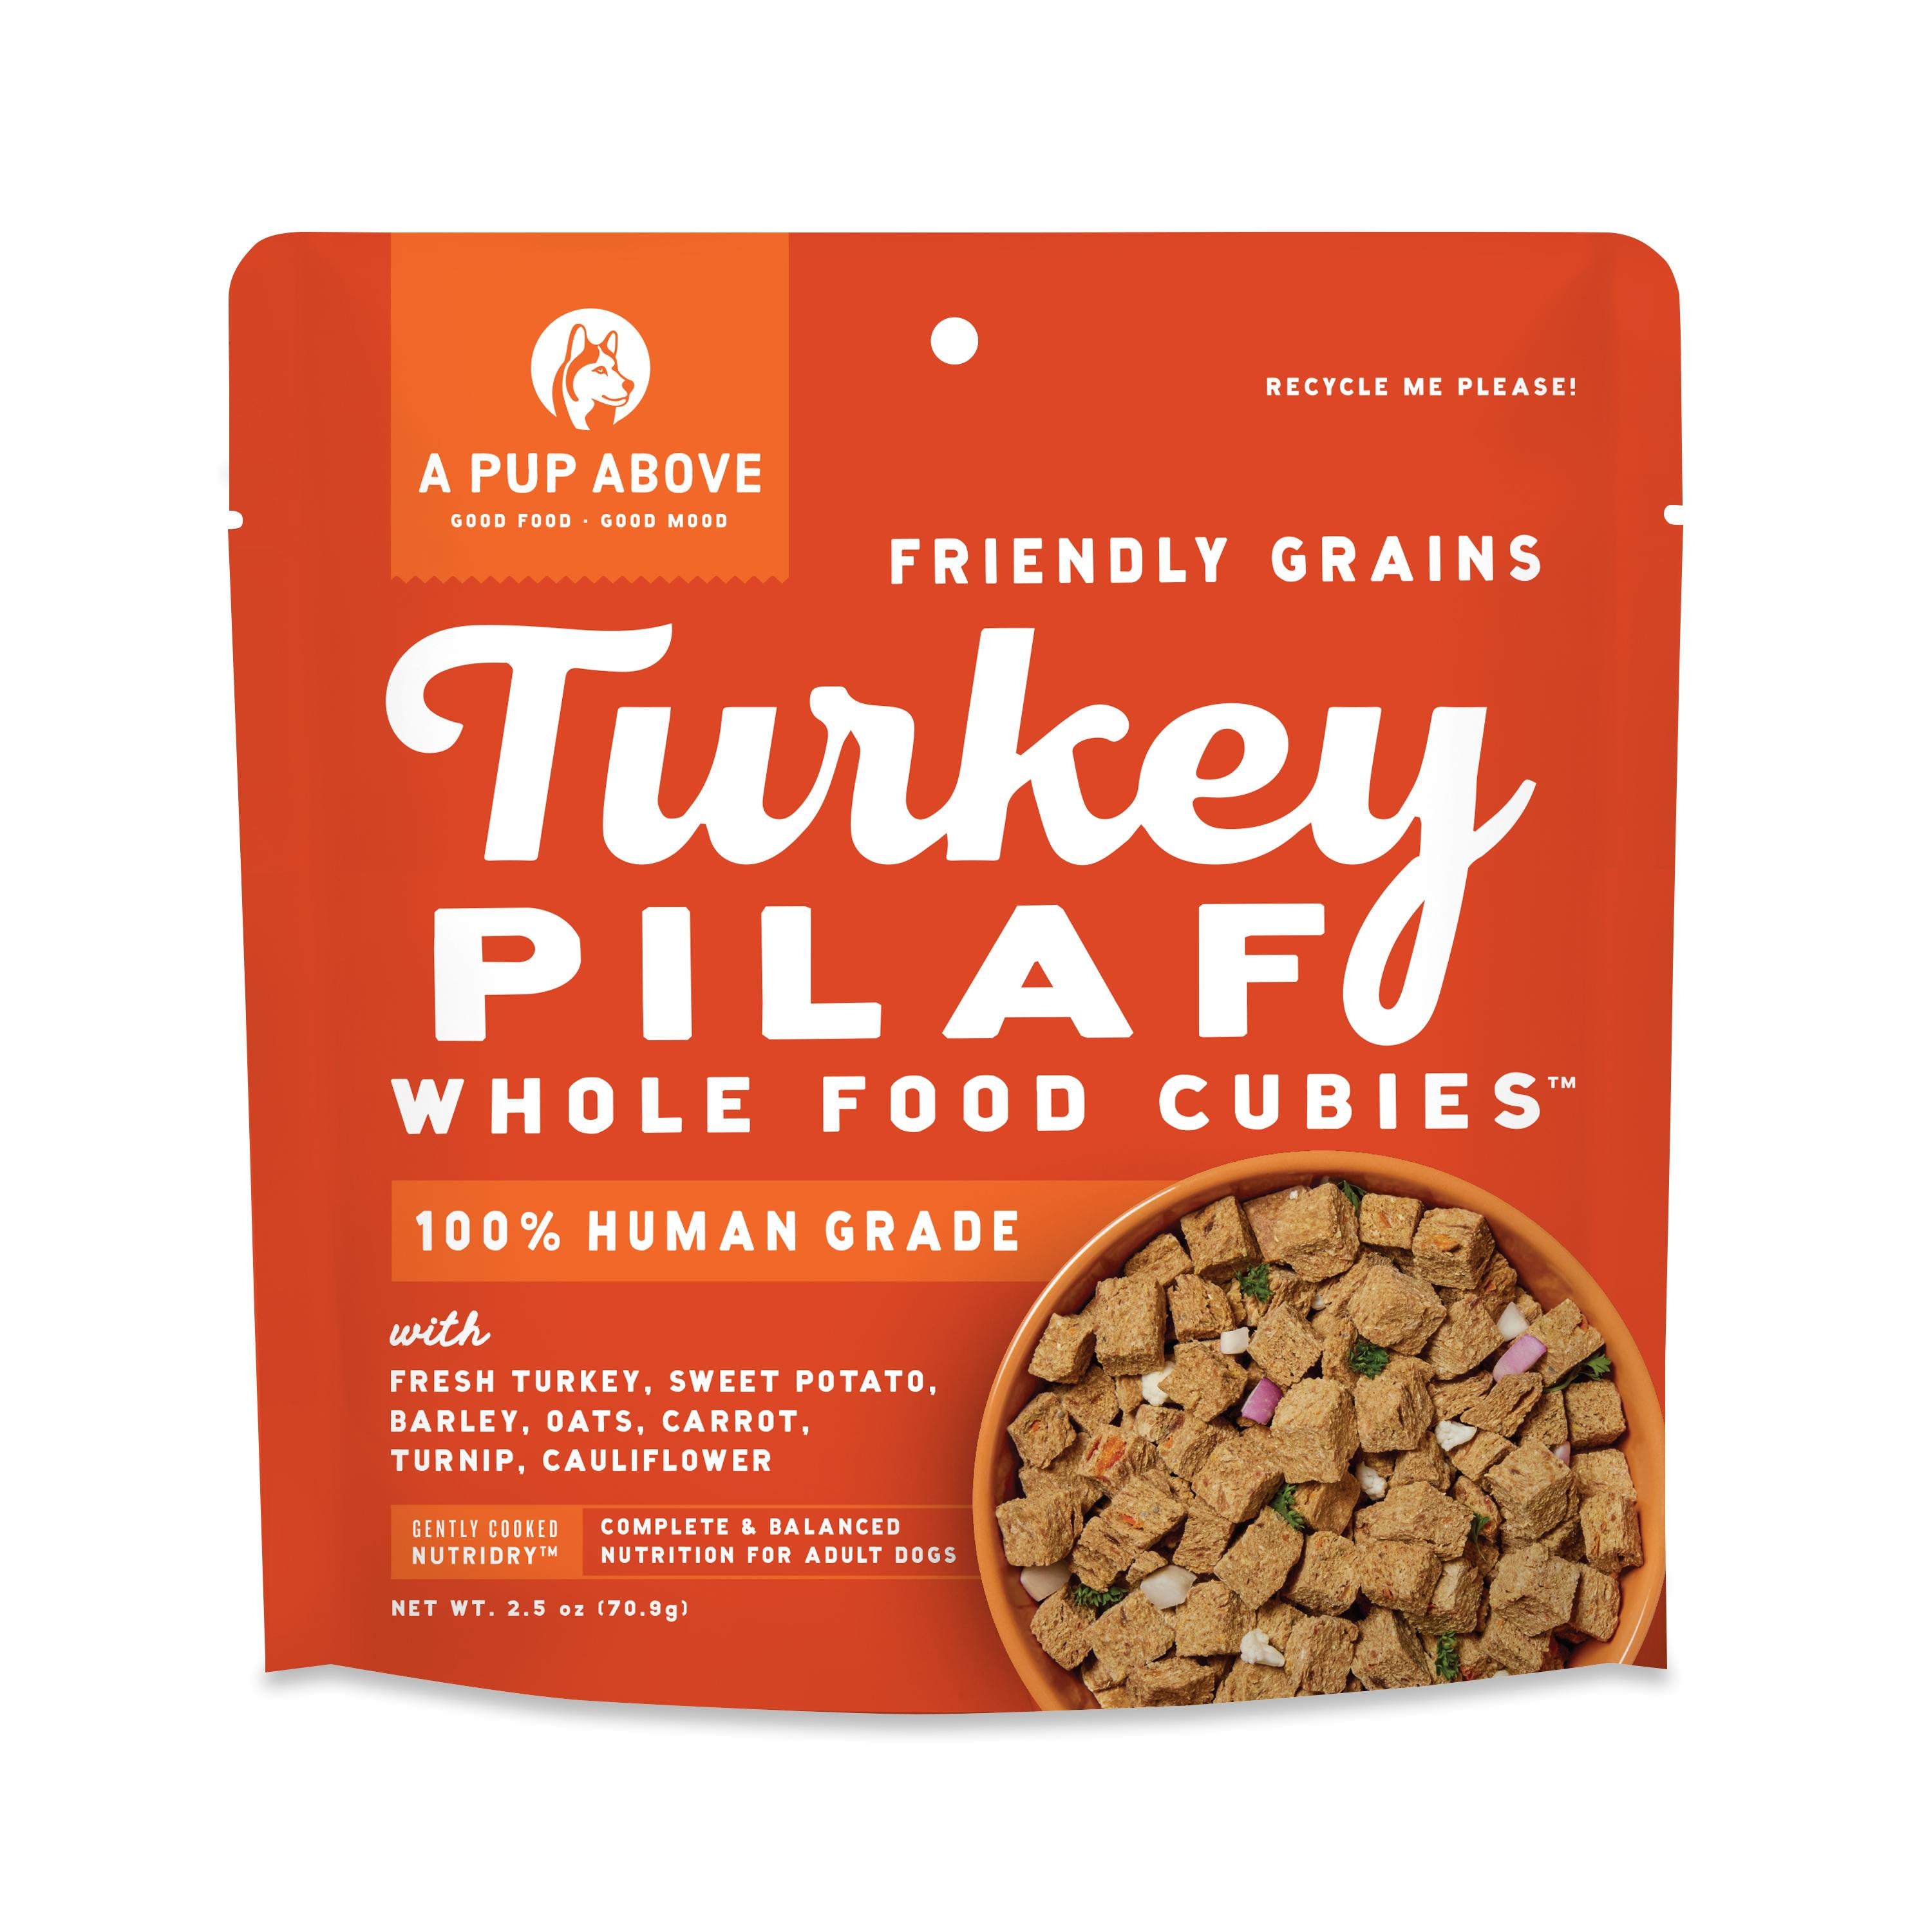 A Pup Above Whole Food Cubies Turkey Pilaf Dry Dog Food